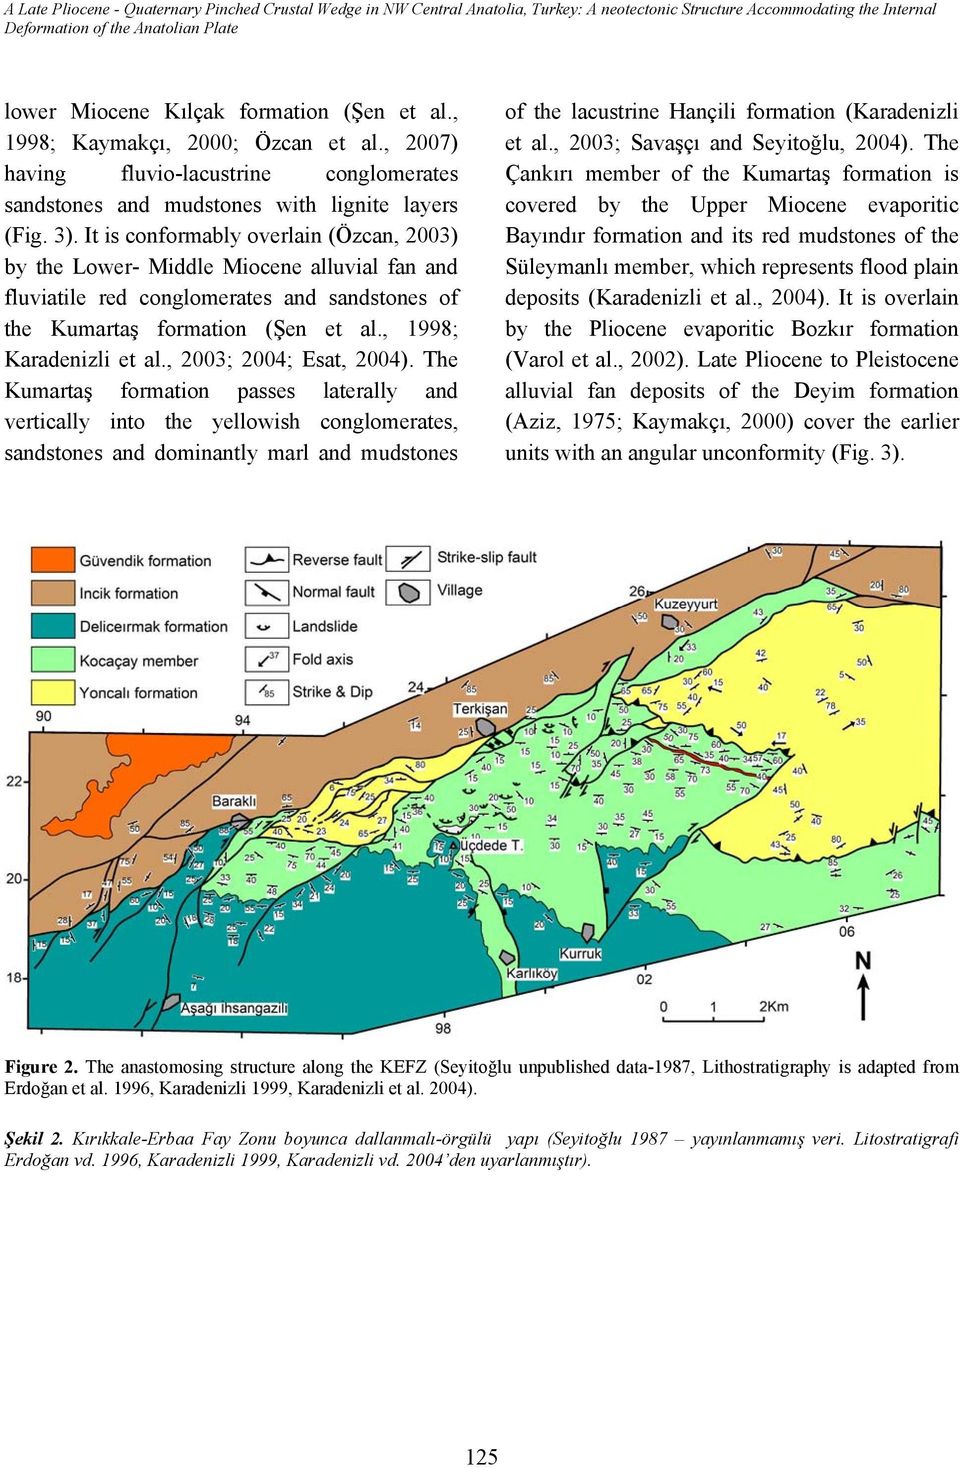 It is conformably overlain (Özcan, 2003) by the Lower- Middle Miocene alluvial fan and fluviatile red conglomerates and sandstones of the Kumartaş formation (Şen et al., 1998; Karadenizli et al.